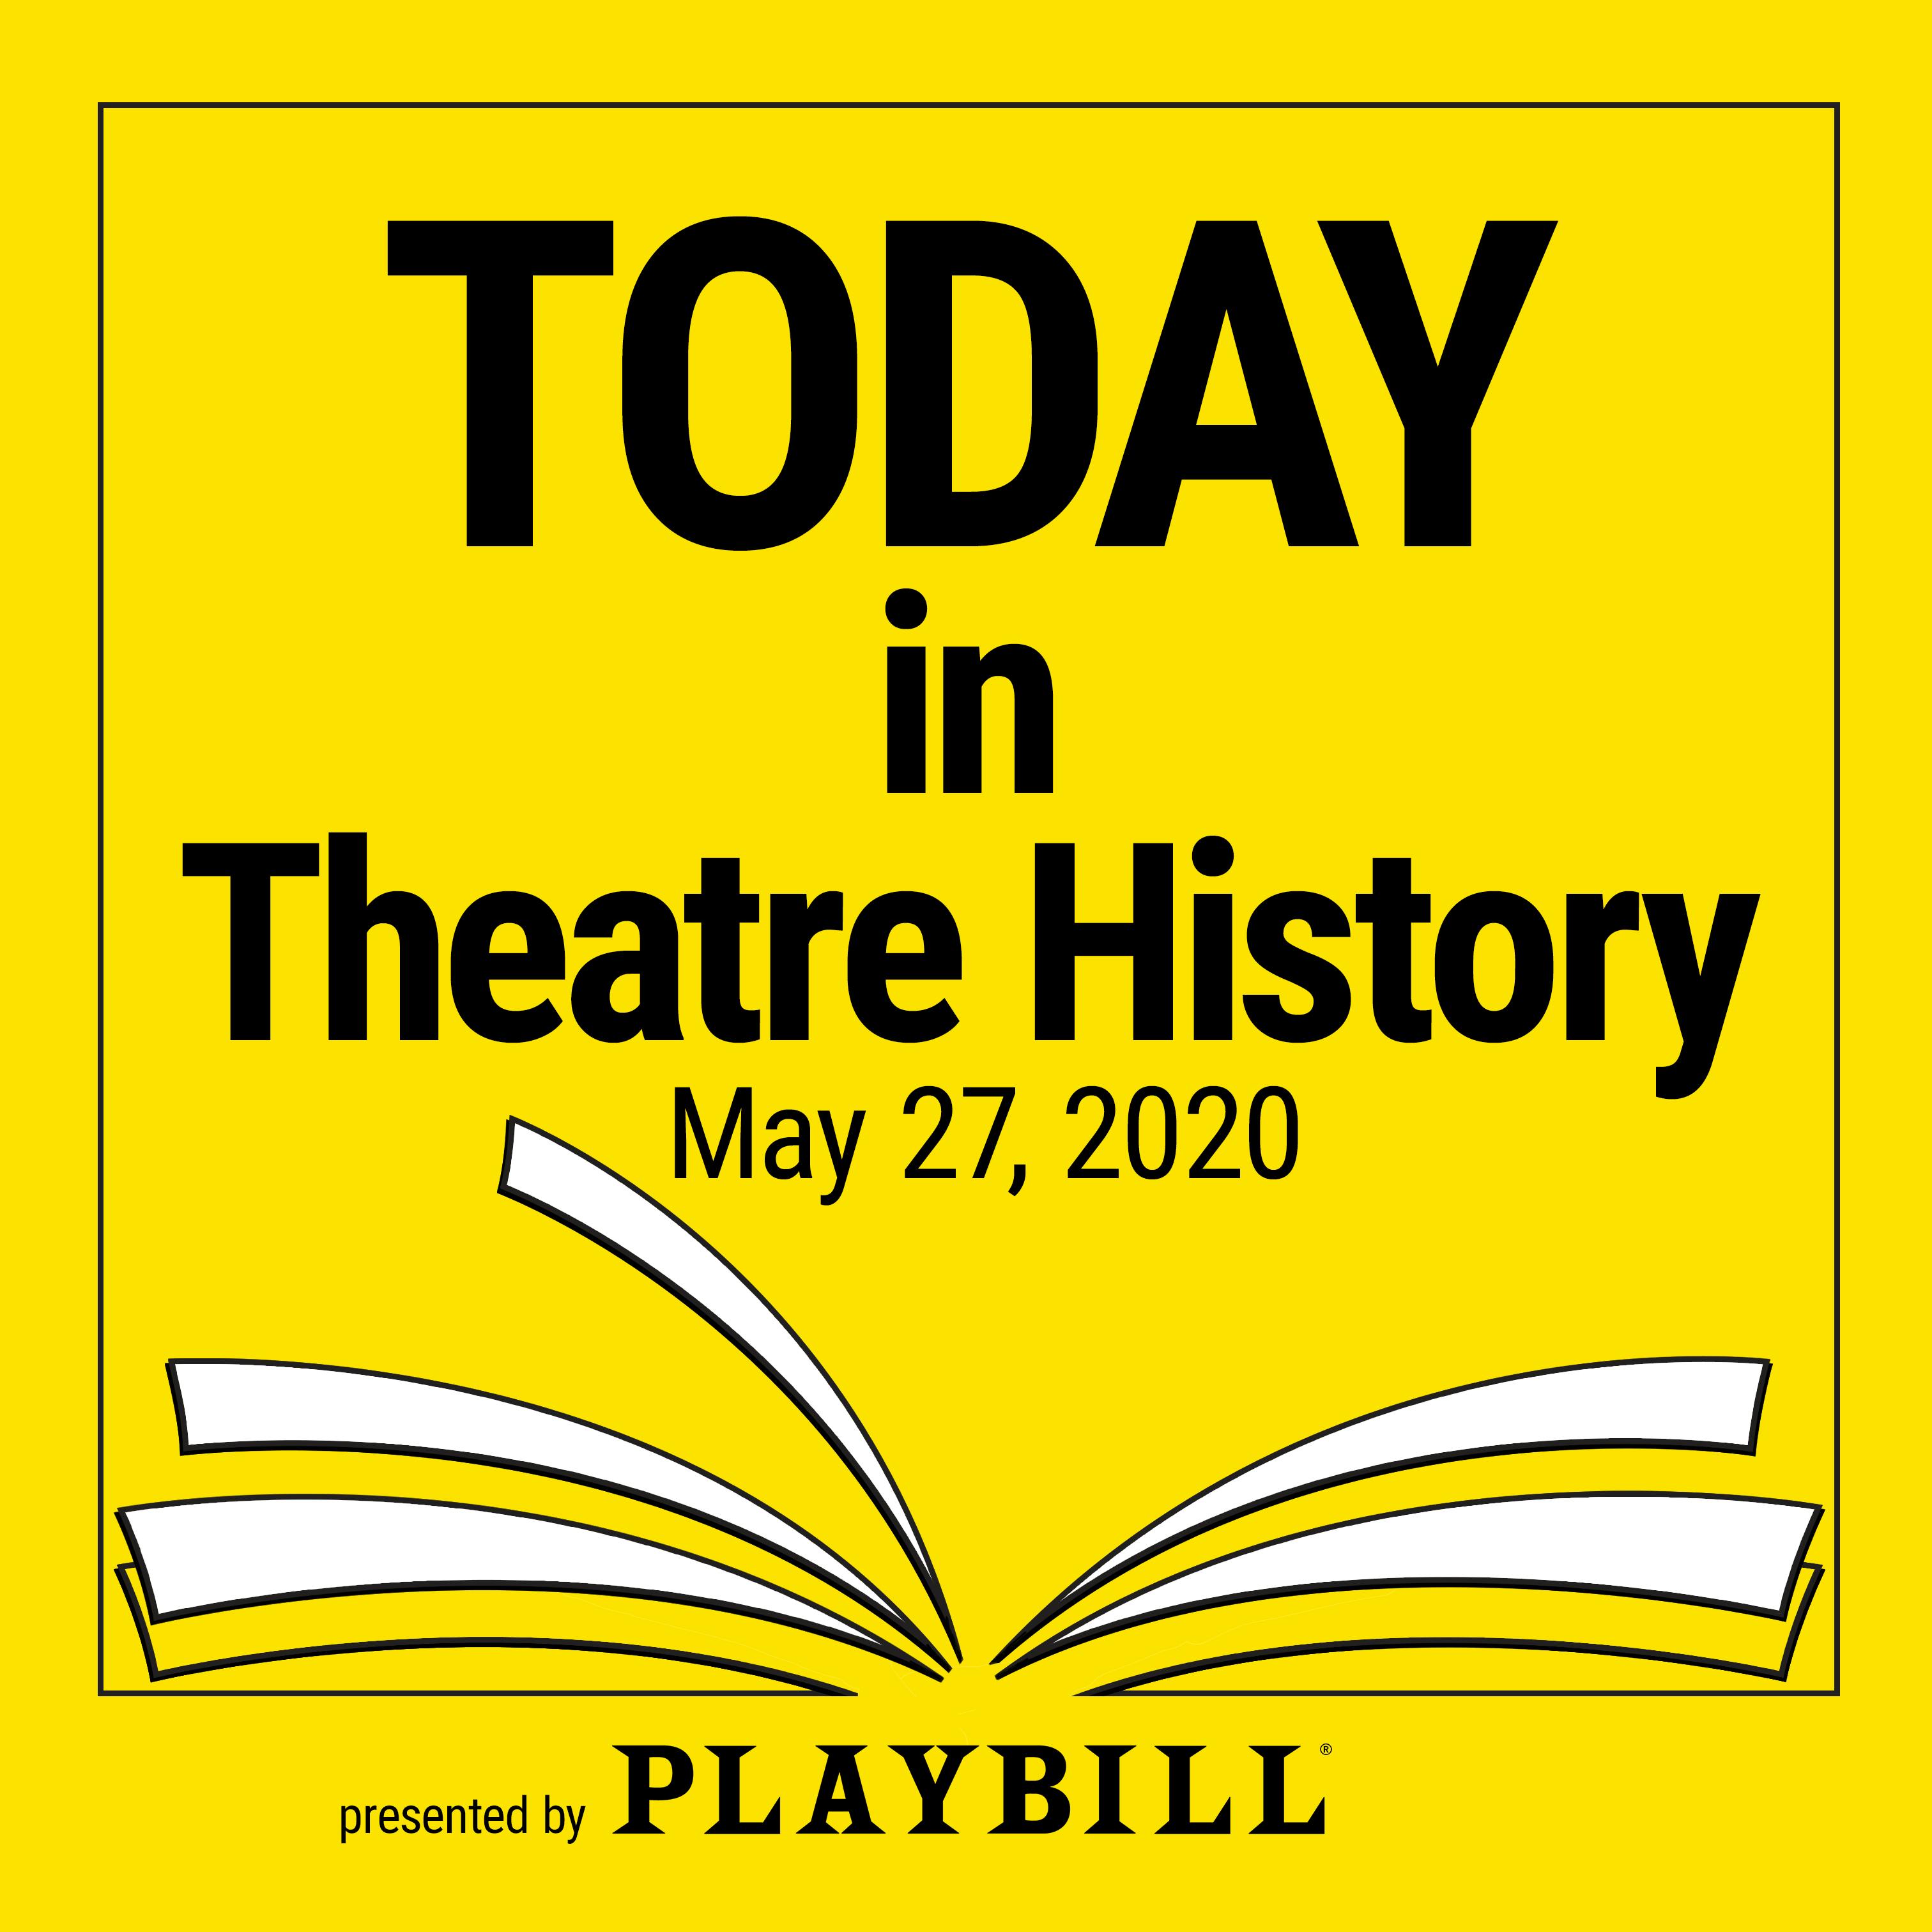 May 27, 2020: After regional productions, I Am My Own Wife made its Off-Broadway debut in 2003 at Playwrights Horizons.